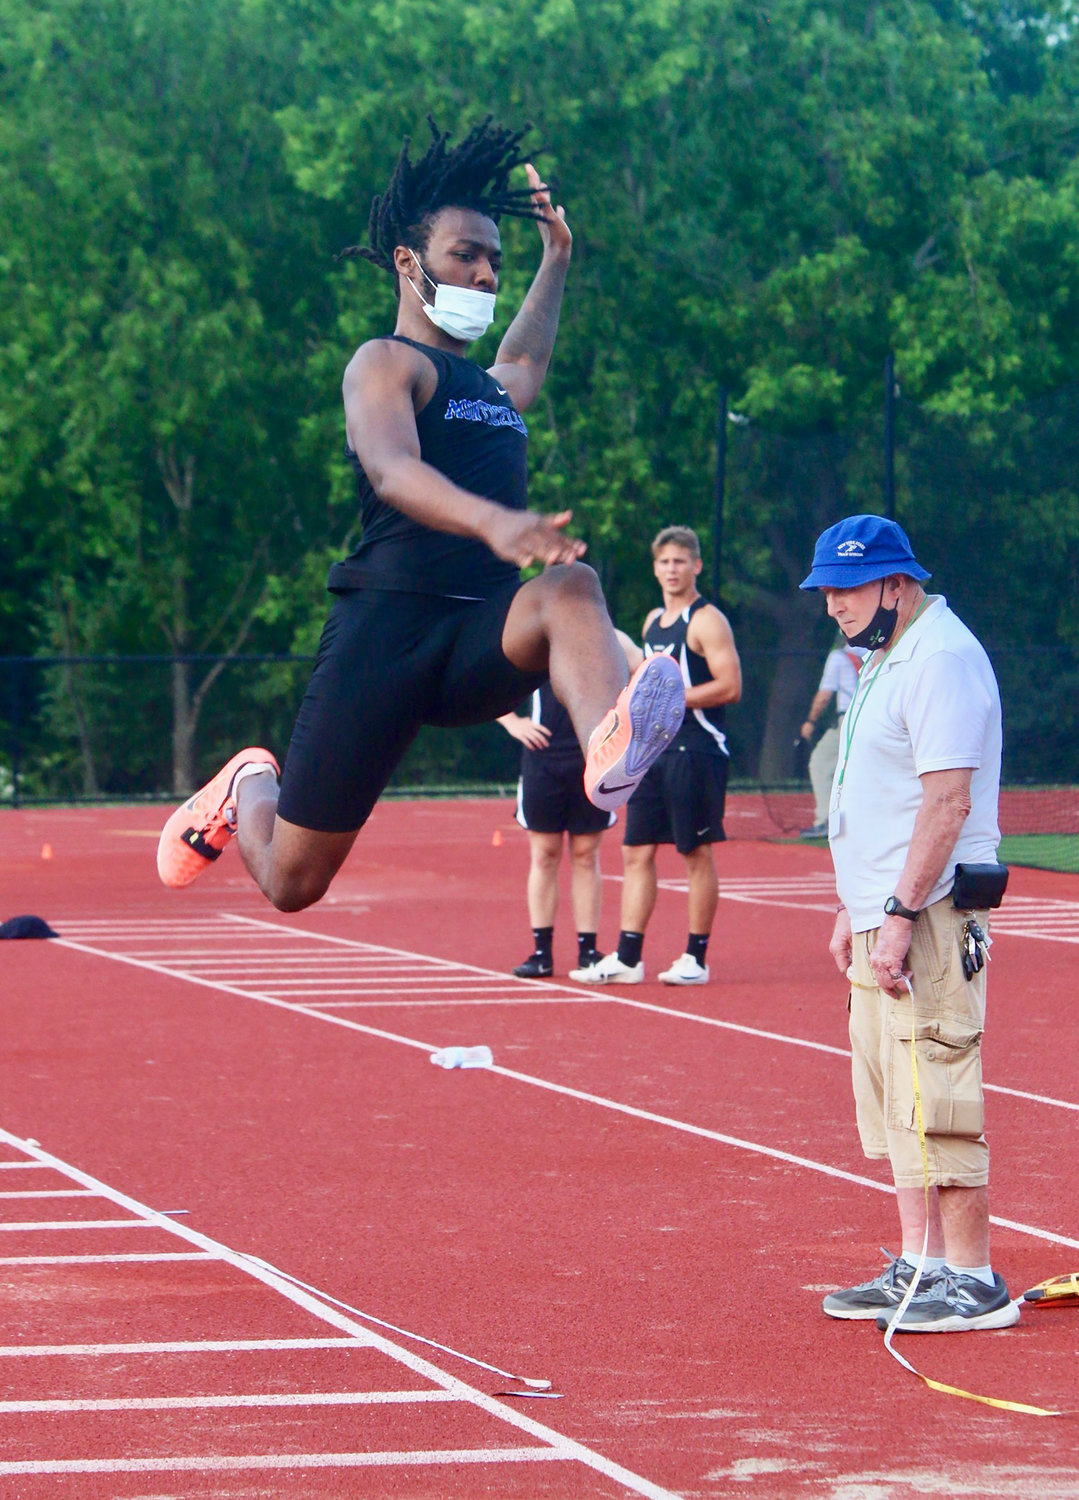 Monticello junior Jivonte Stubbs goes airborne in the long jump to take third place with a leap of 20-4.